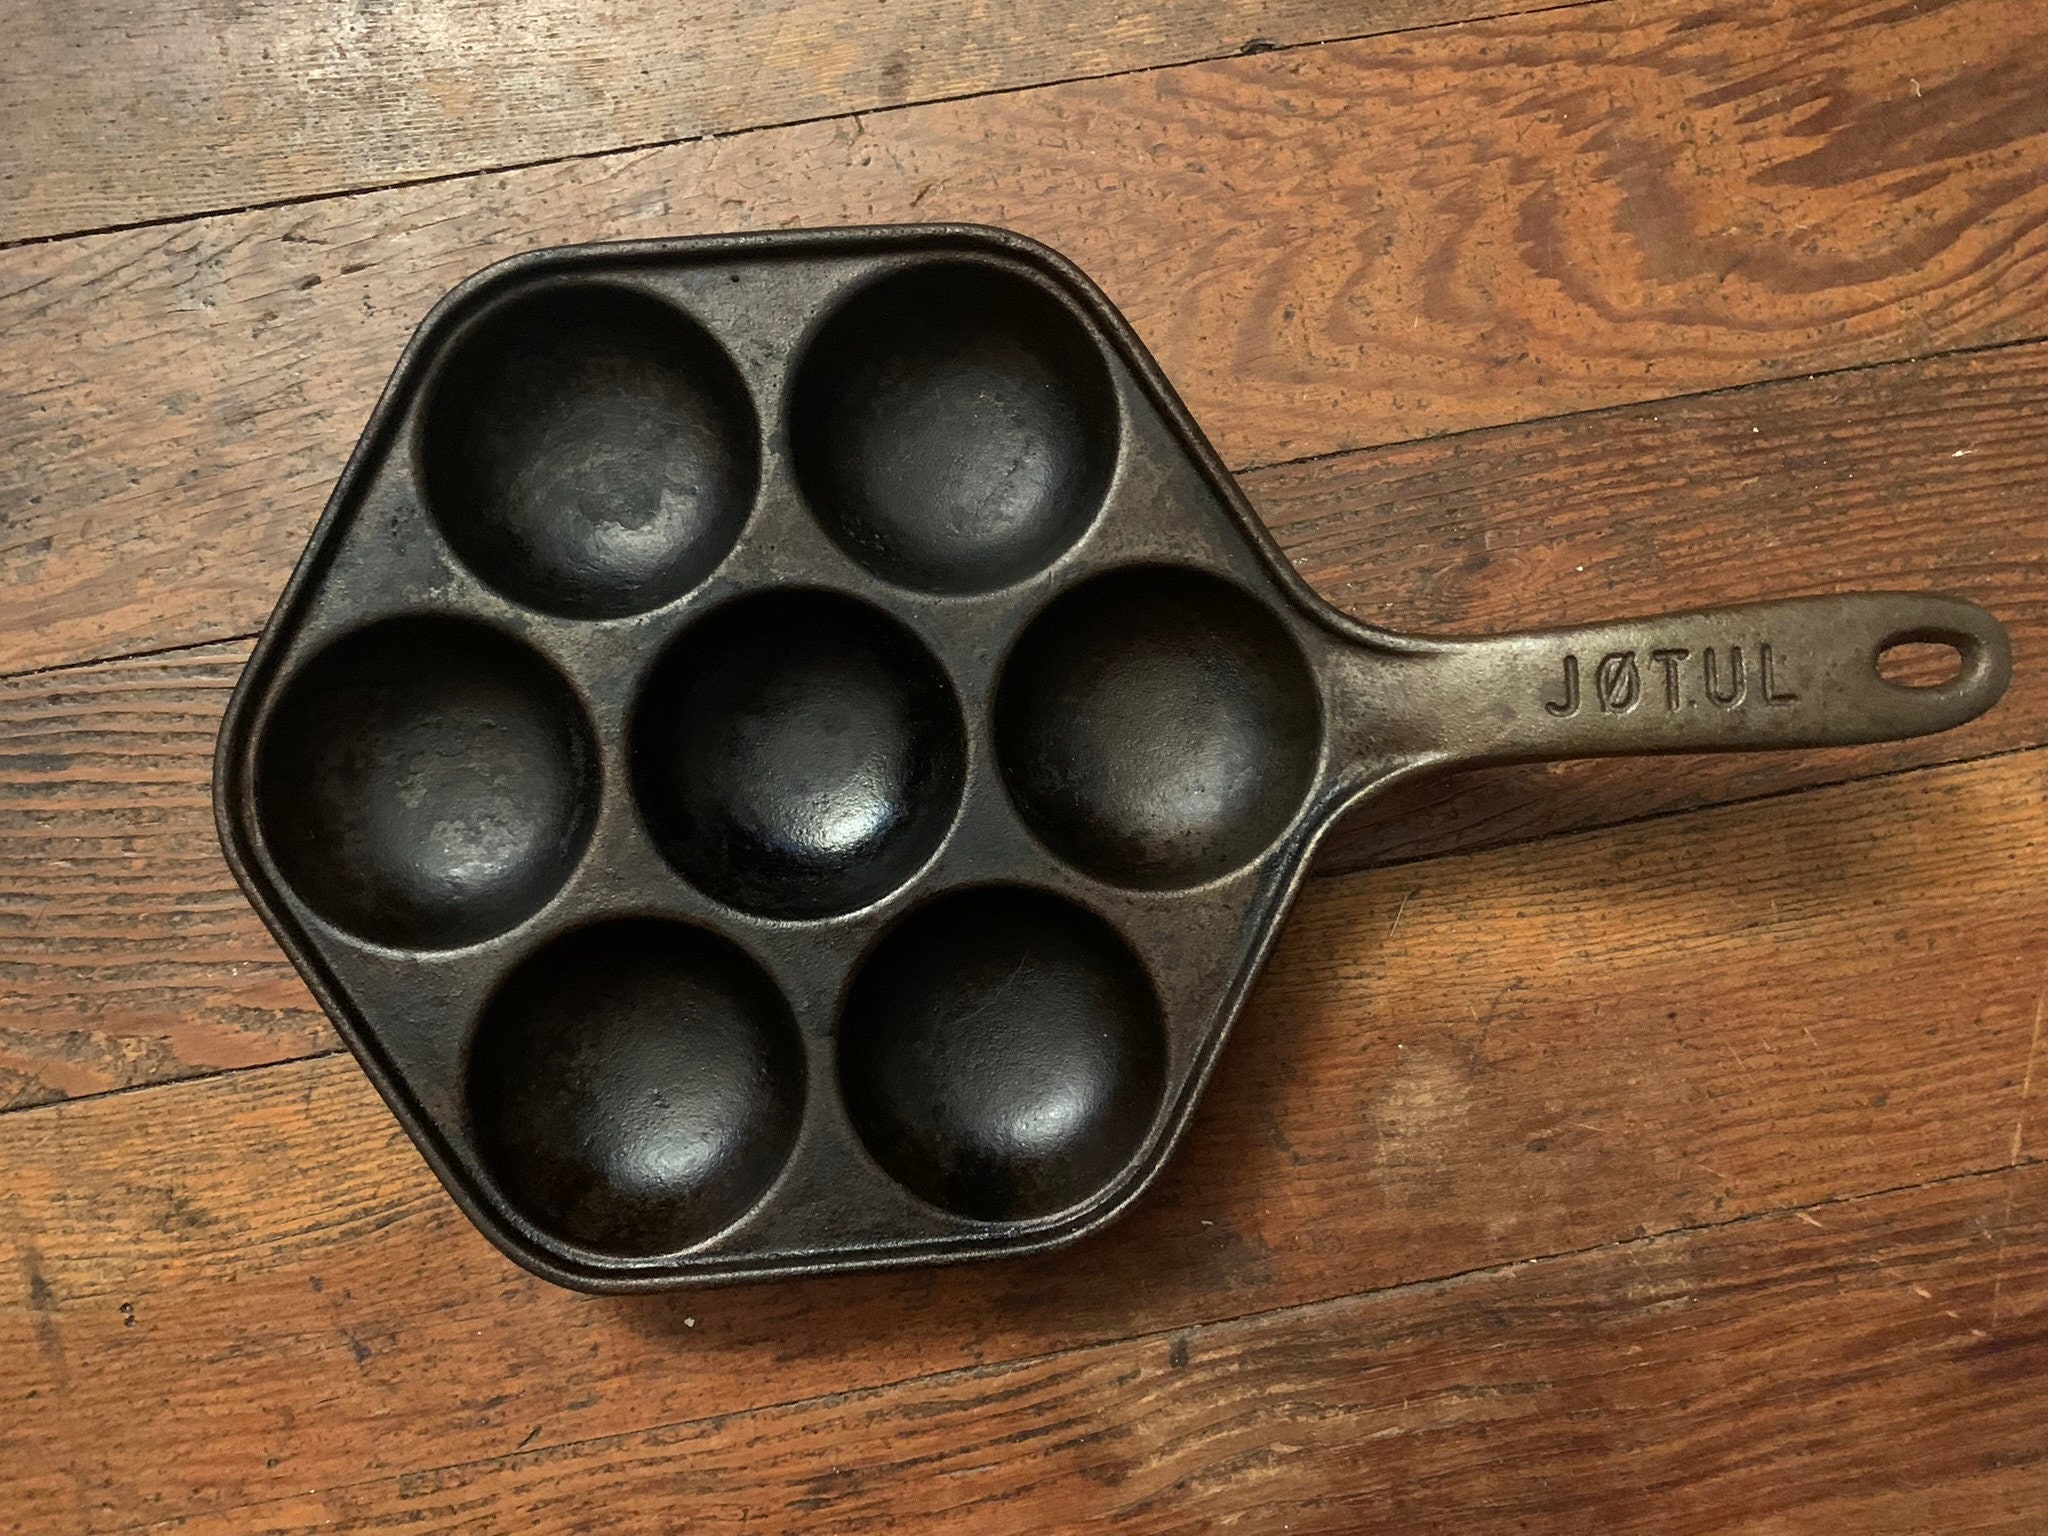 Vintage Cast Iron Jotul Aebleskiver Pan Made in Norway 